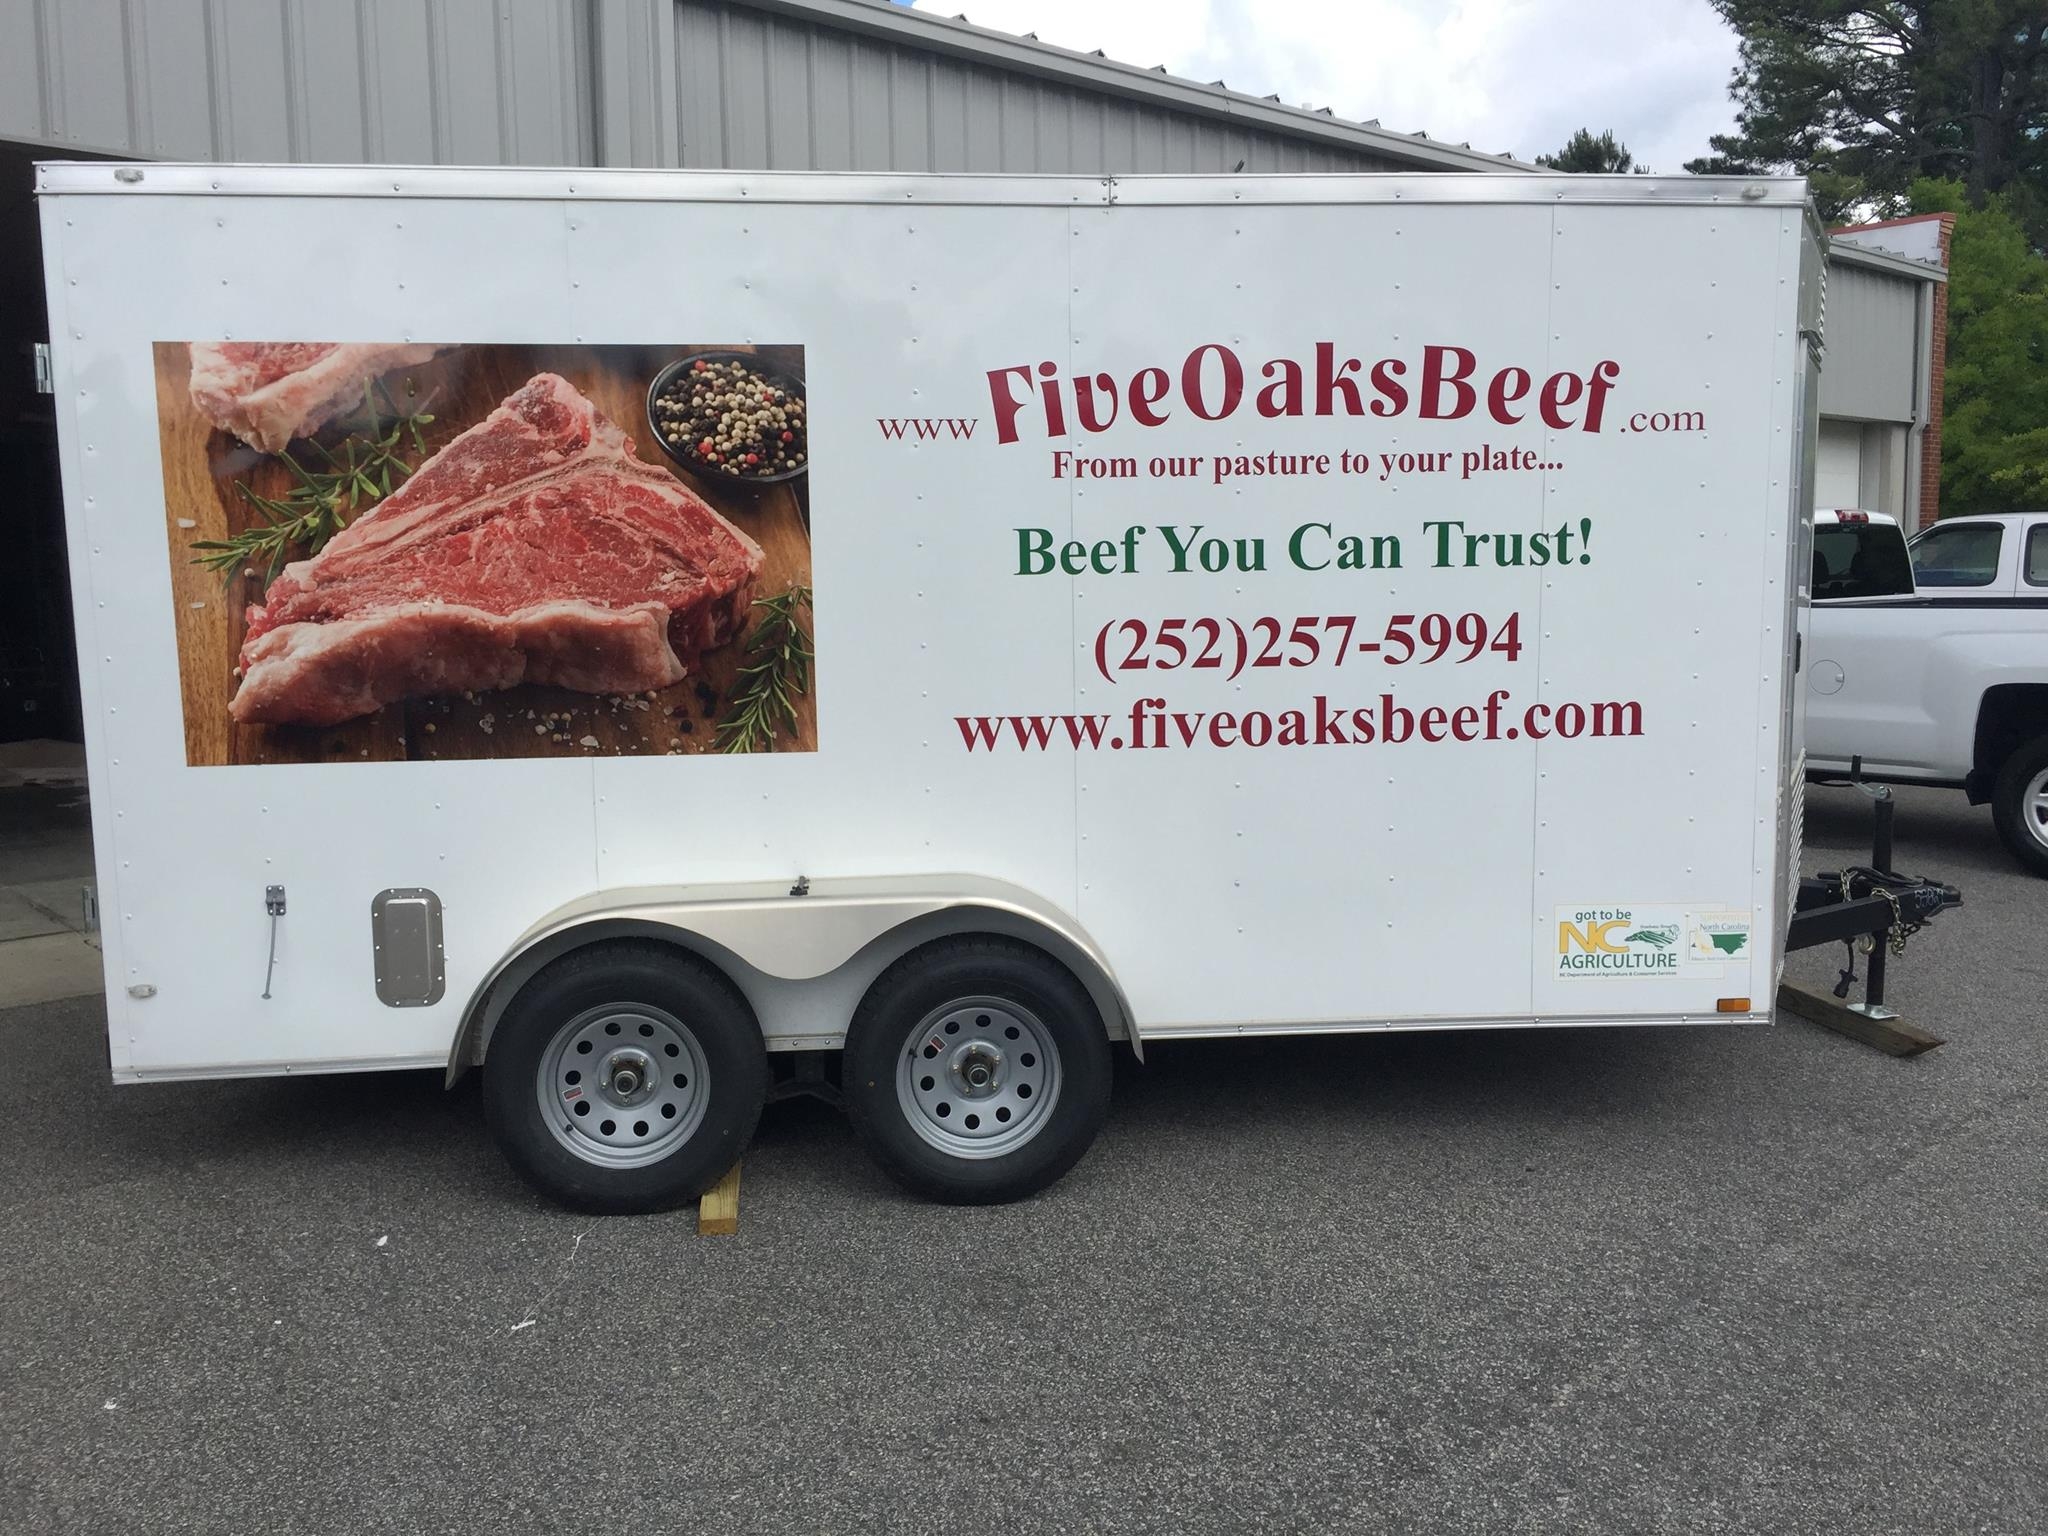 Commercial Vehicle Wrap in Raleigh